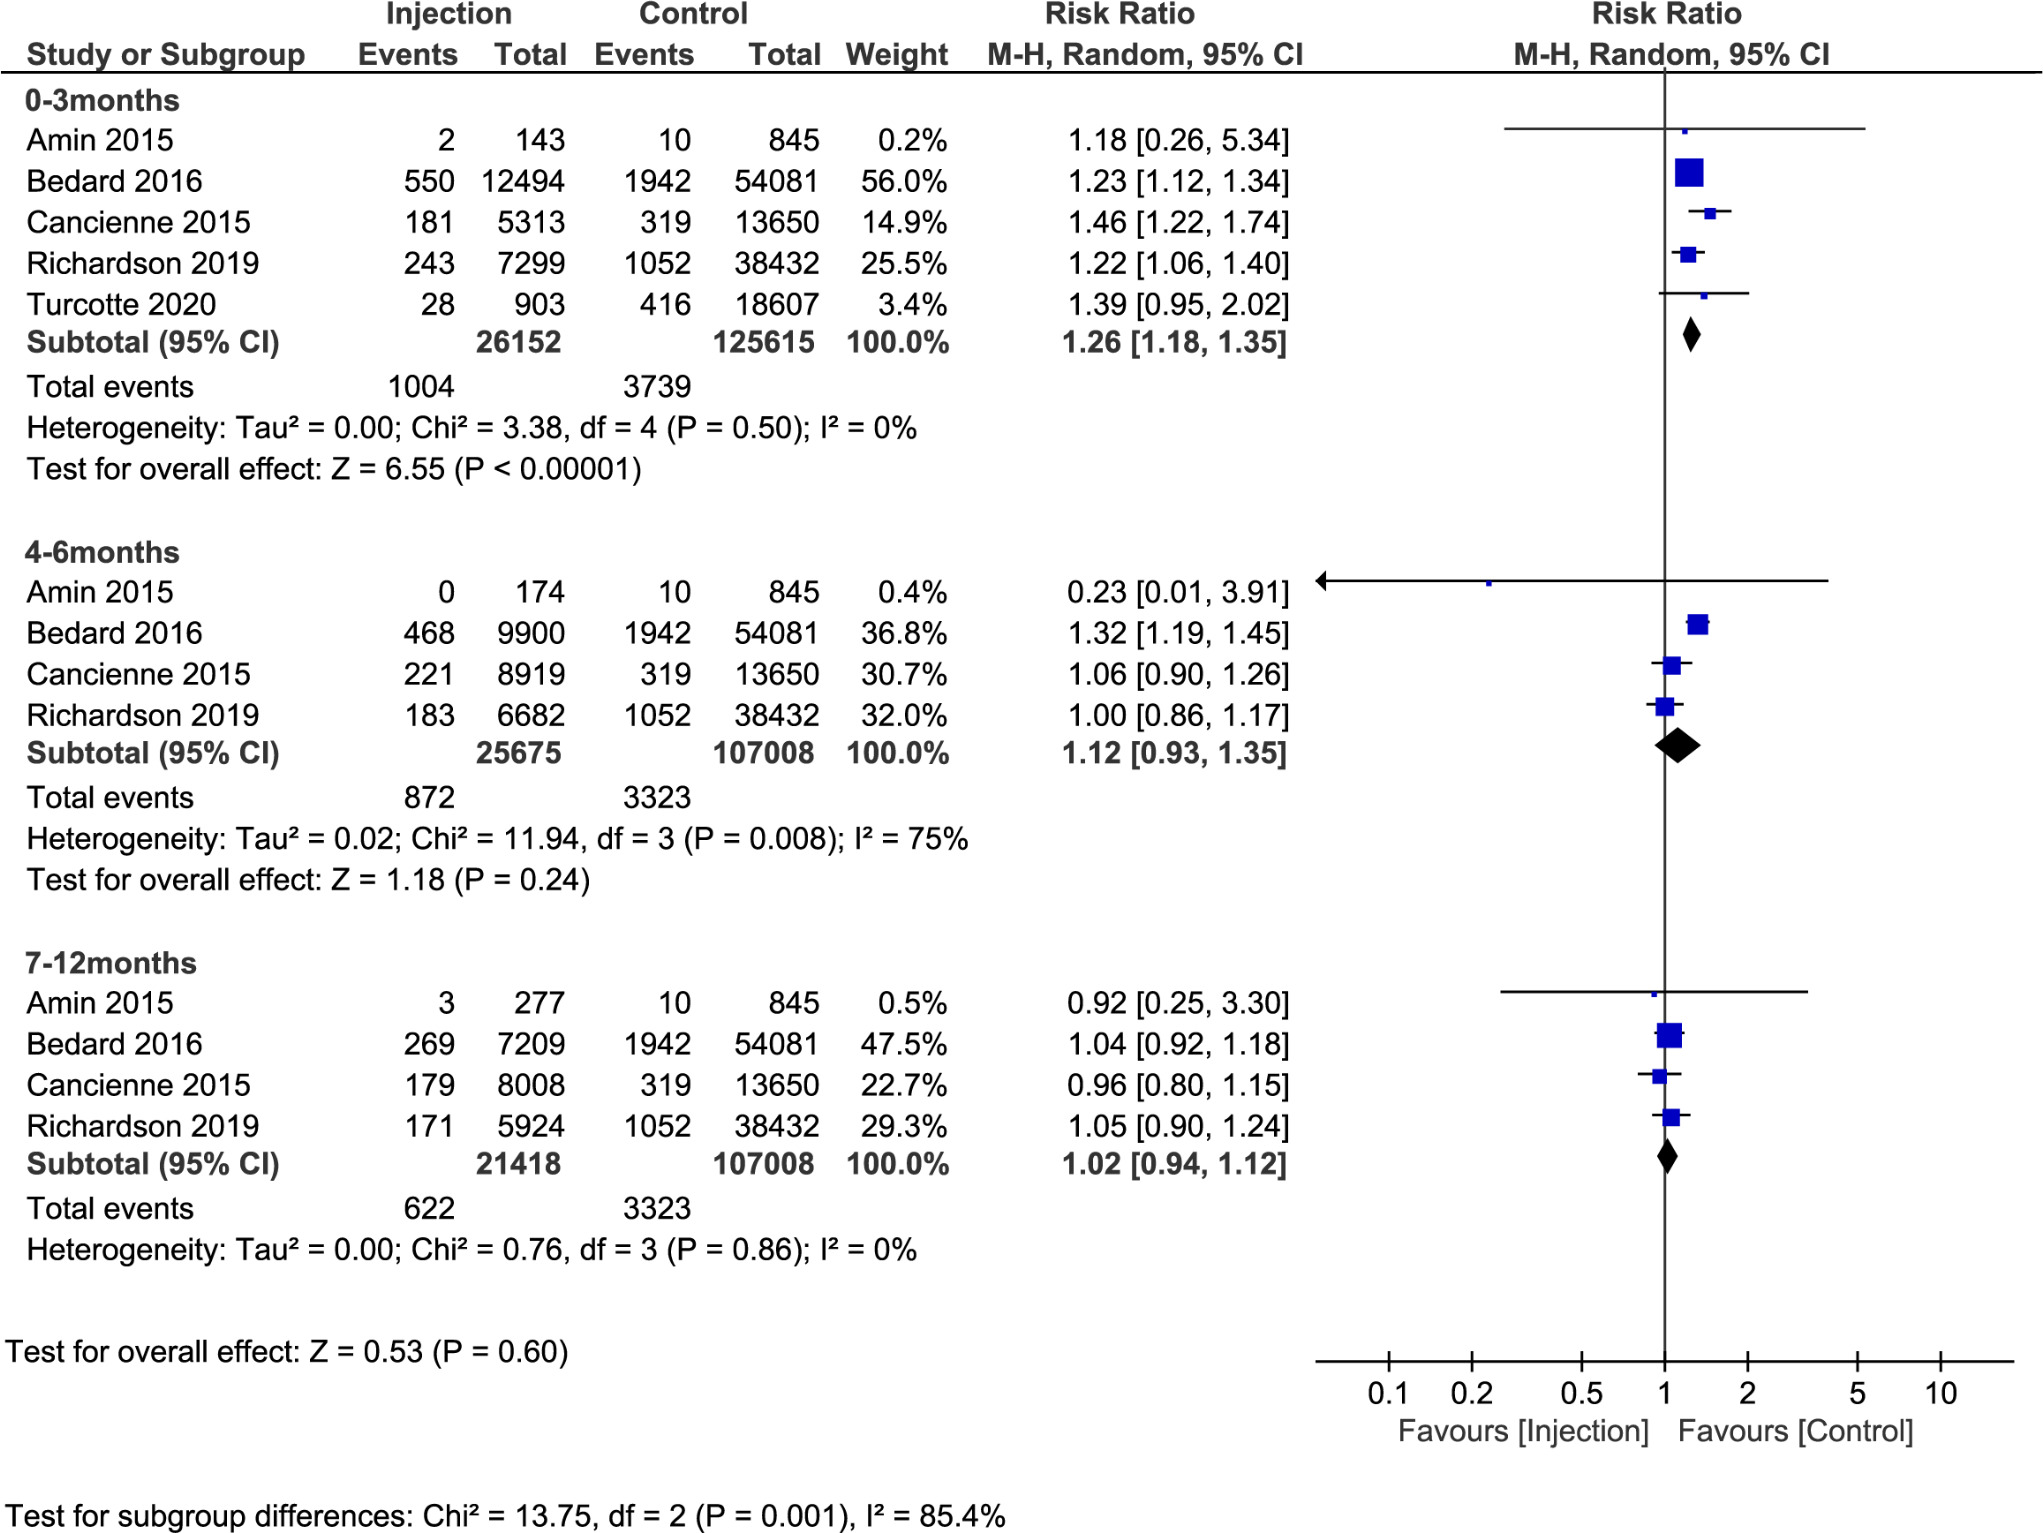 Fig. 3 
            Results of meta-analysis for different preoperative injection time periods. CI, confidence interval; M-H, Mantel-Haenszel.
          